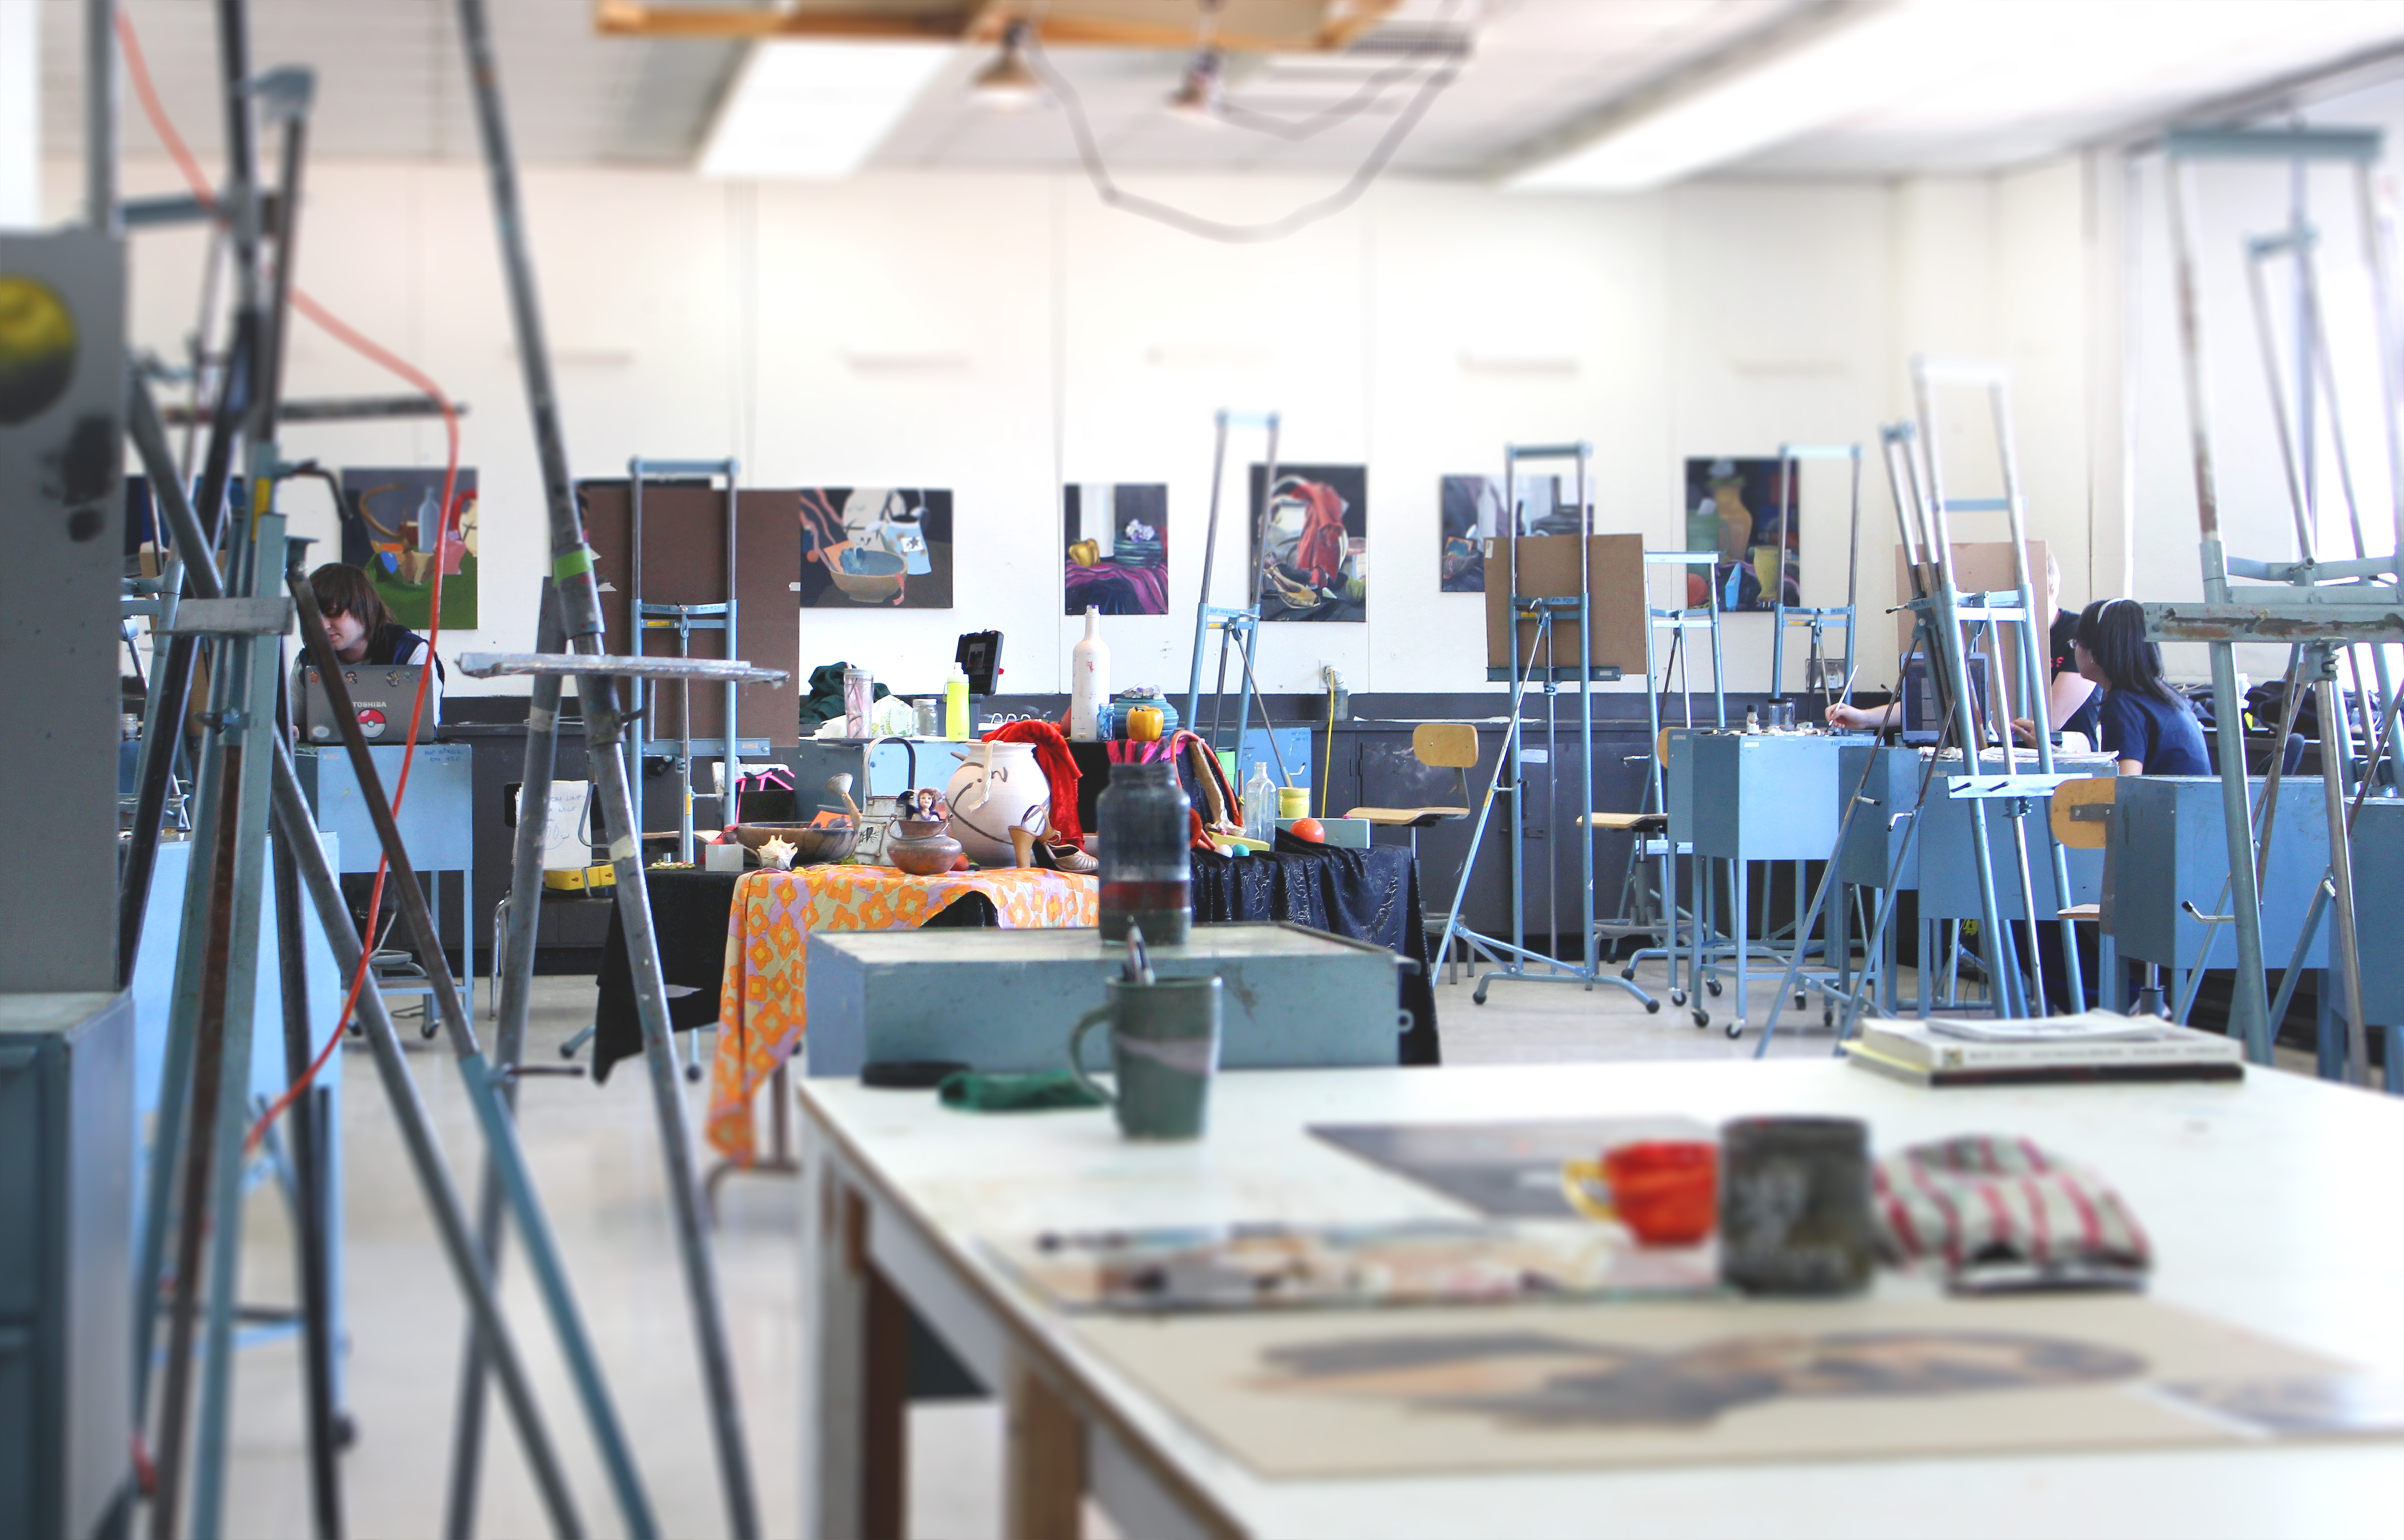 view of a paint studio with canvases and stations